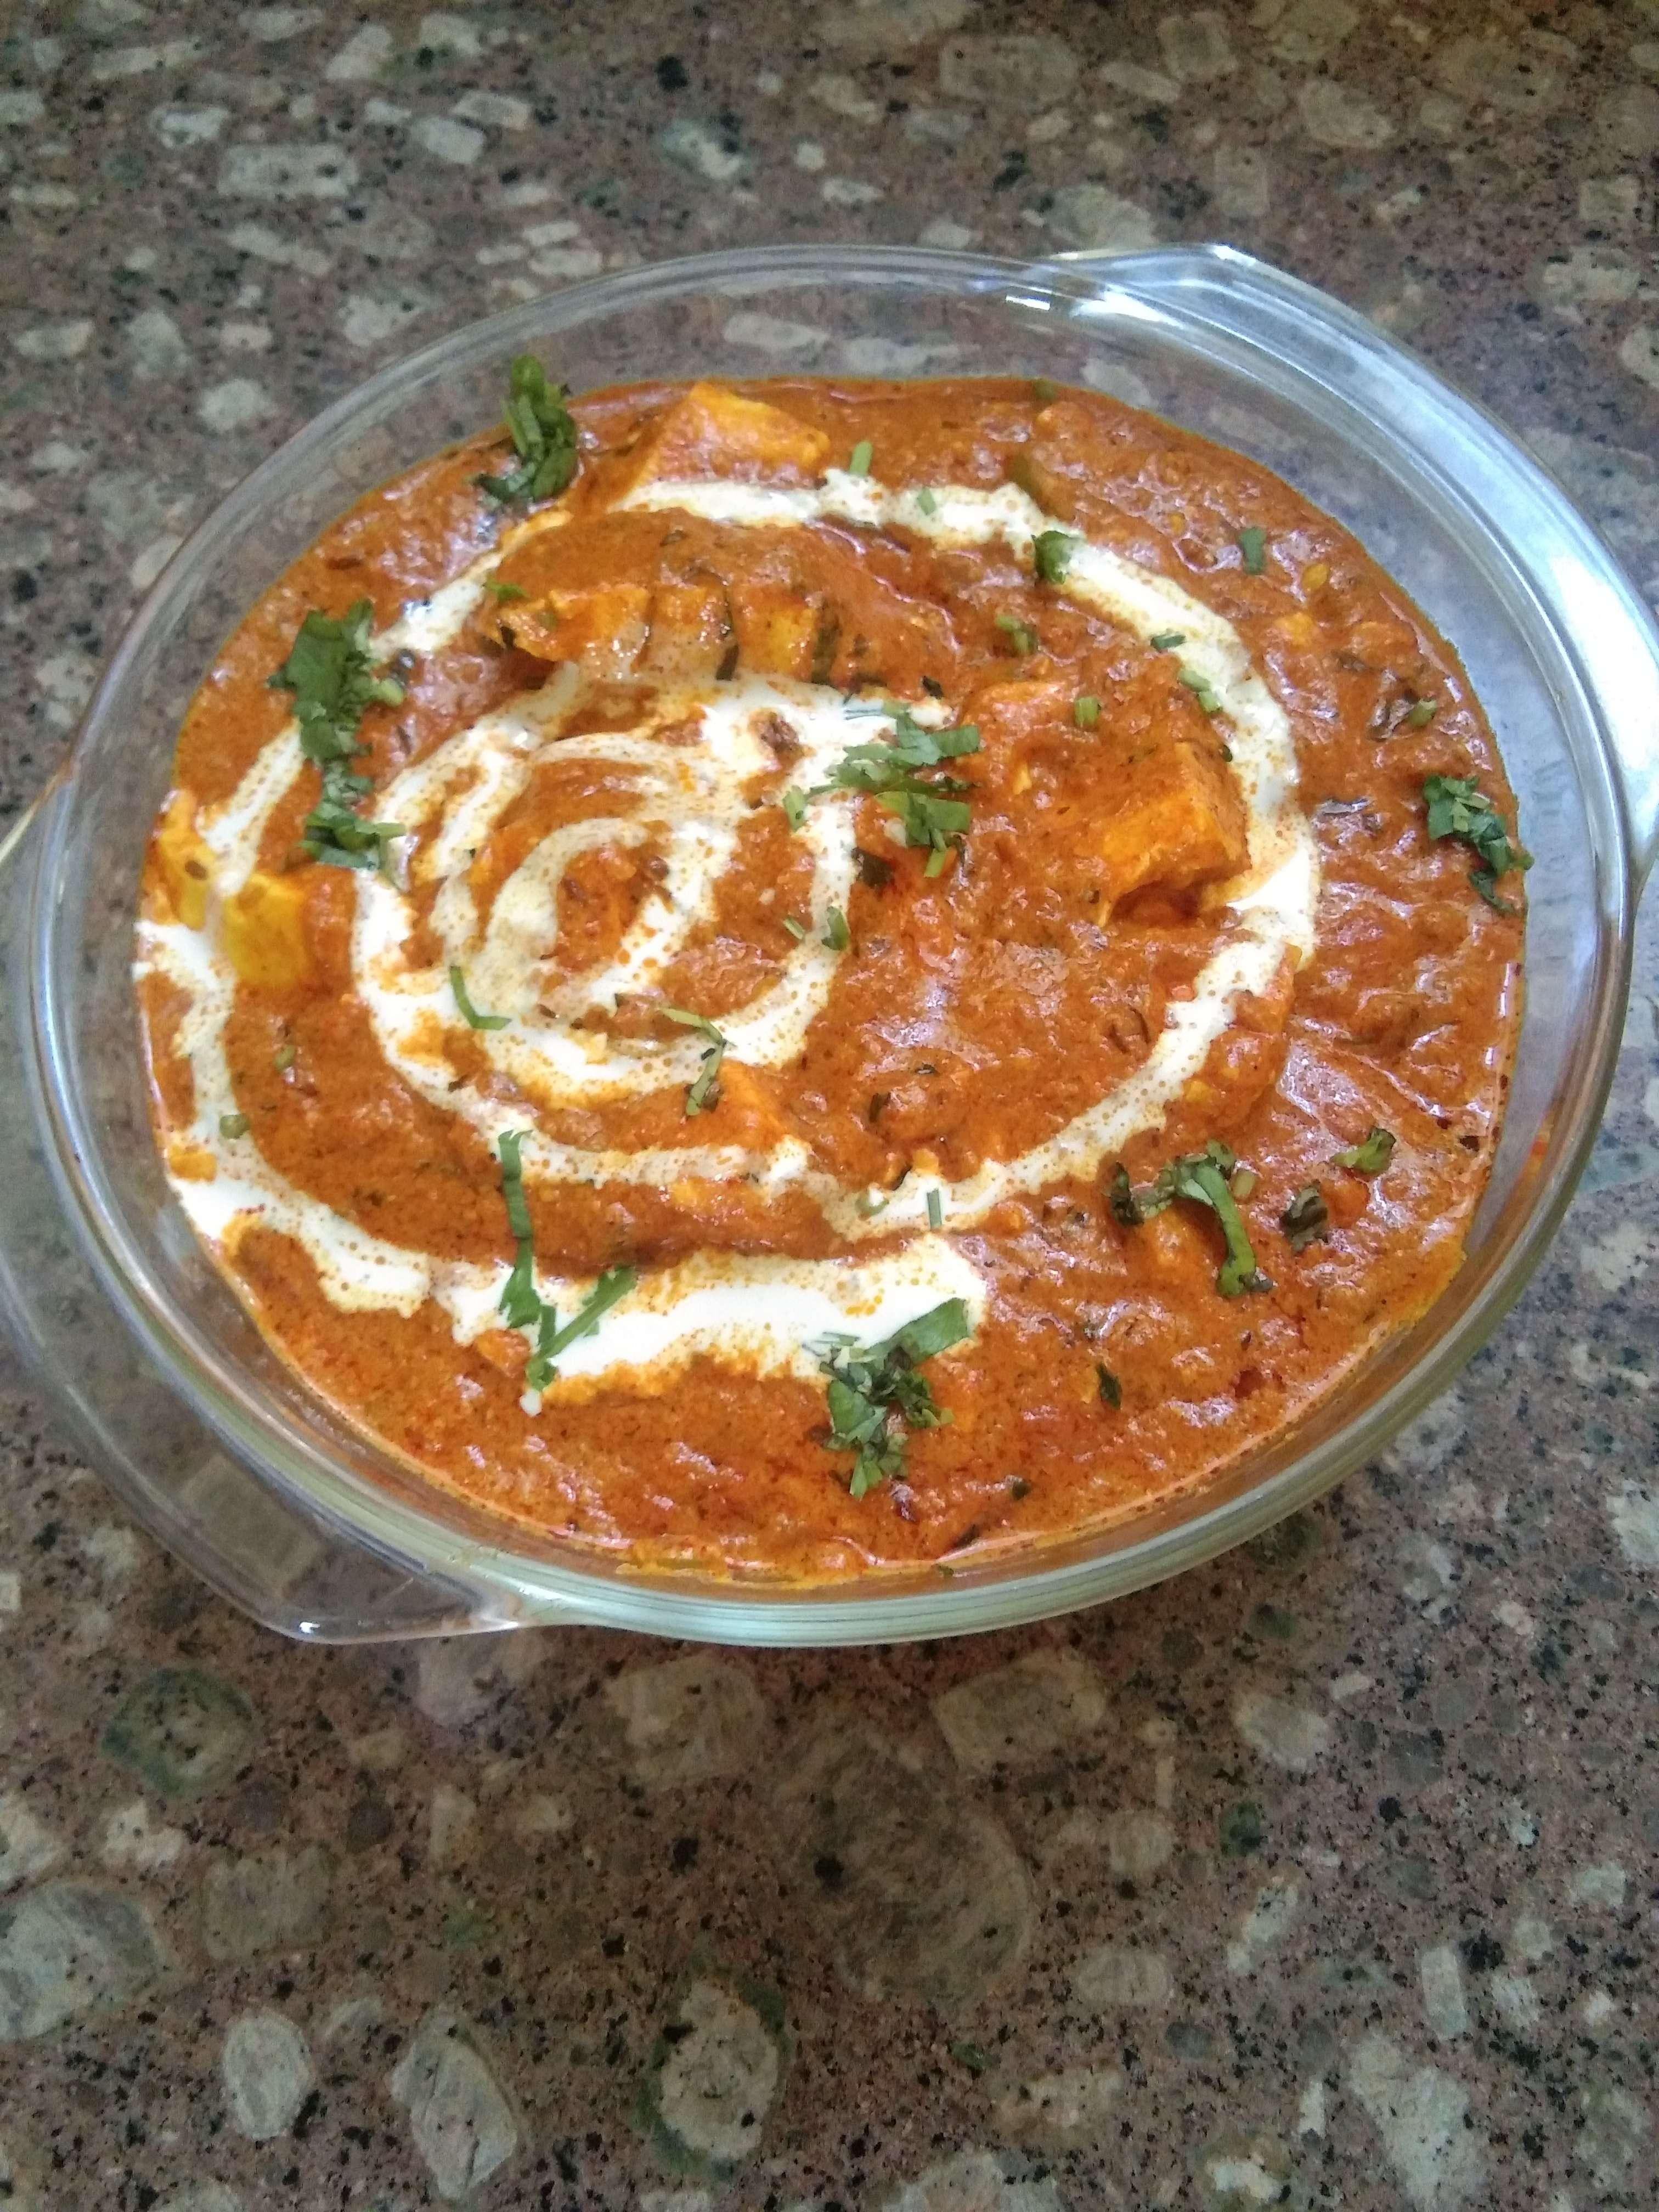 Tasty Paneer Lababdar cooked by COOX chefs cooks during occasions parties events at home